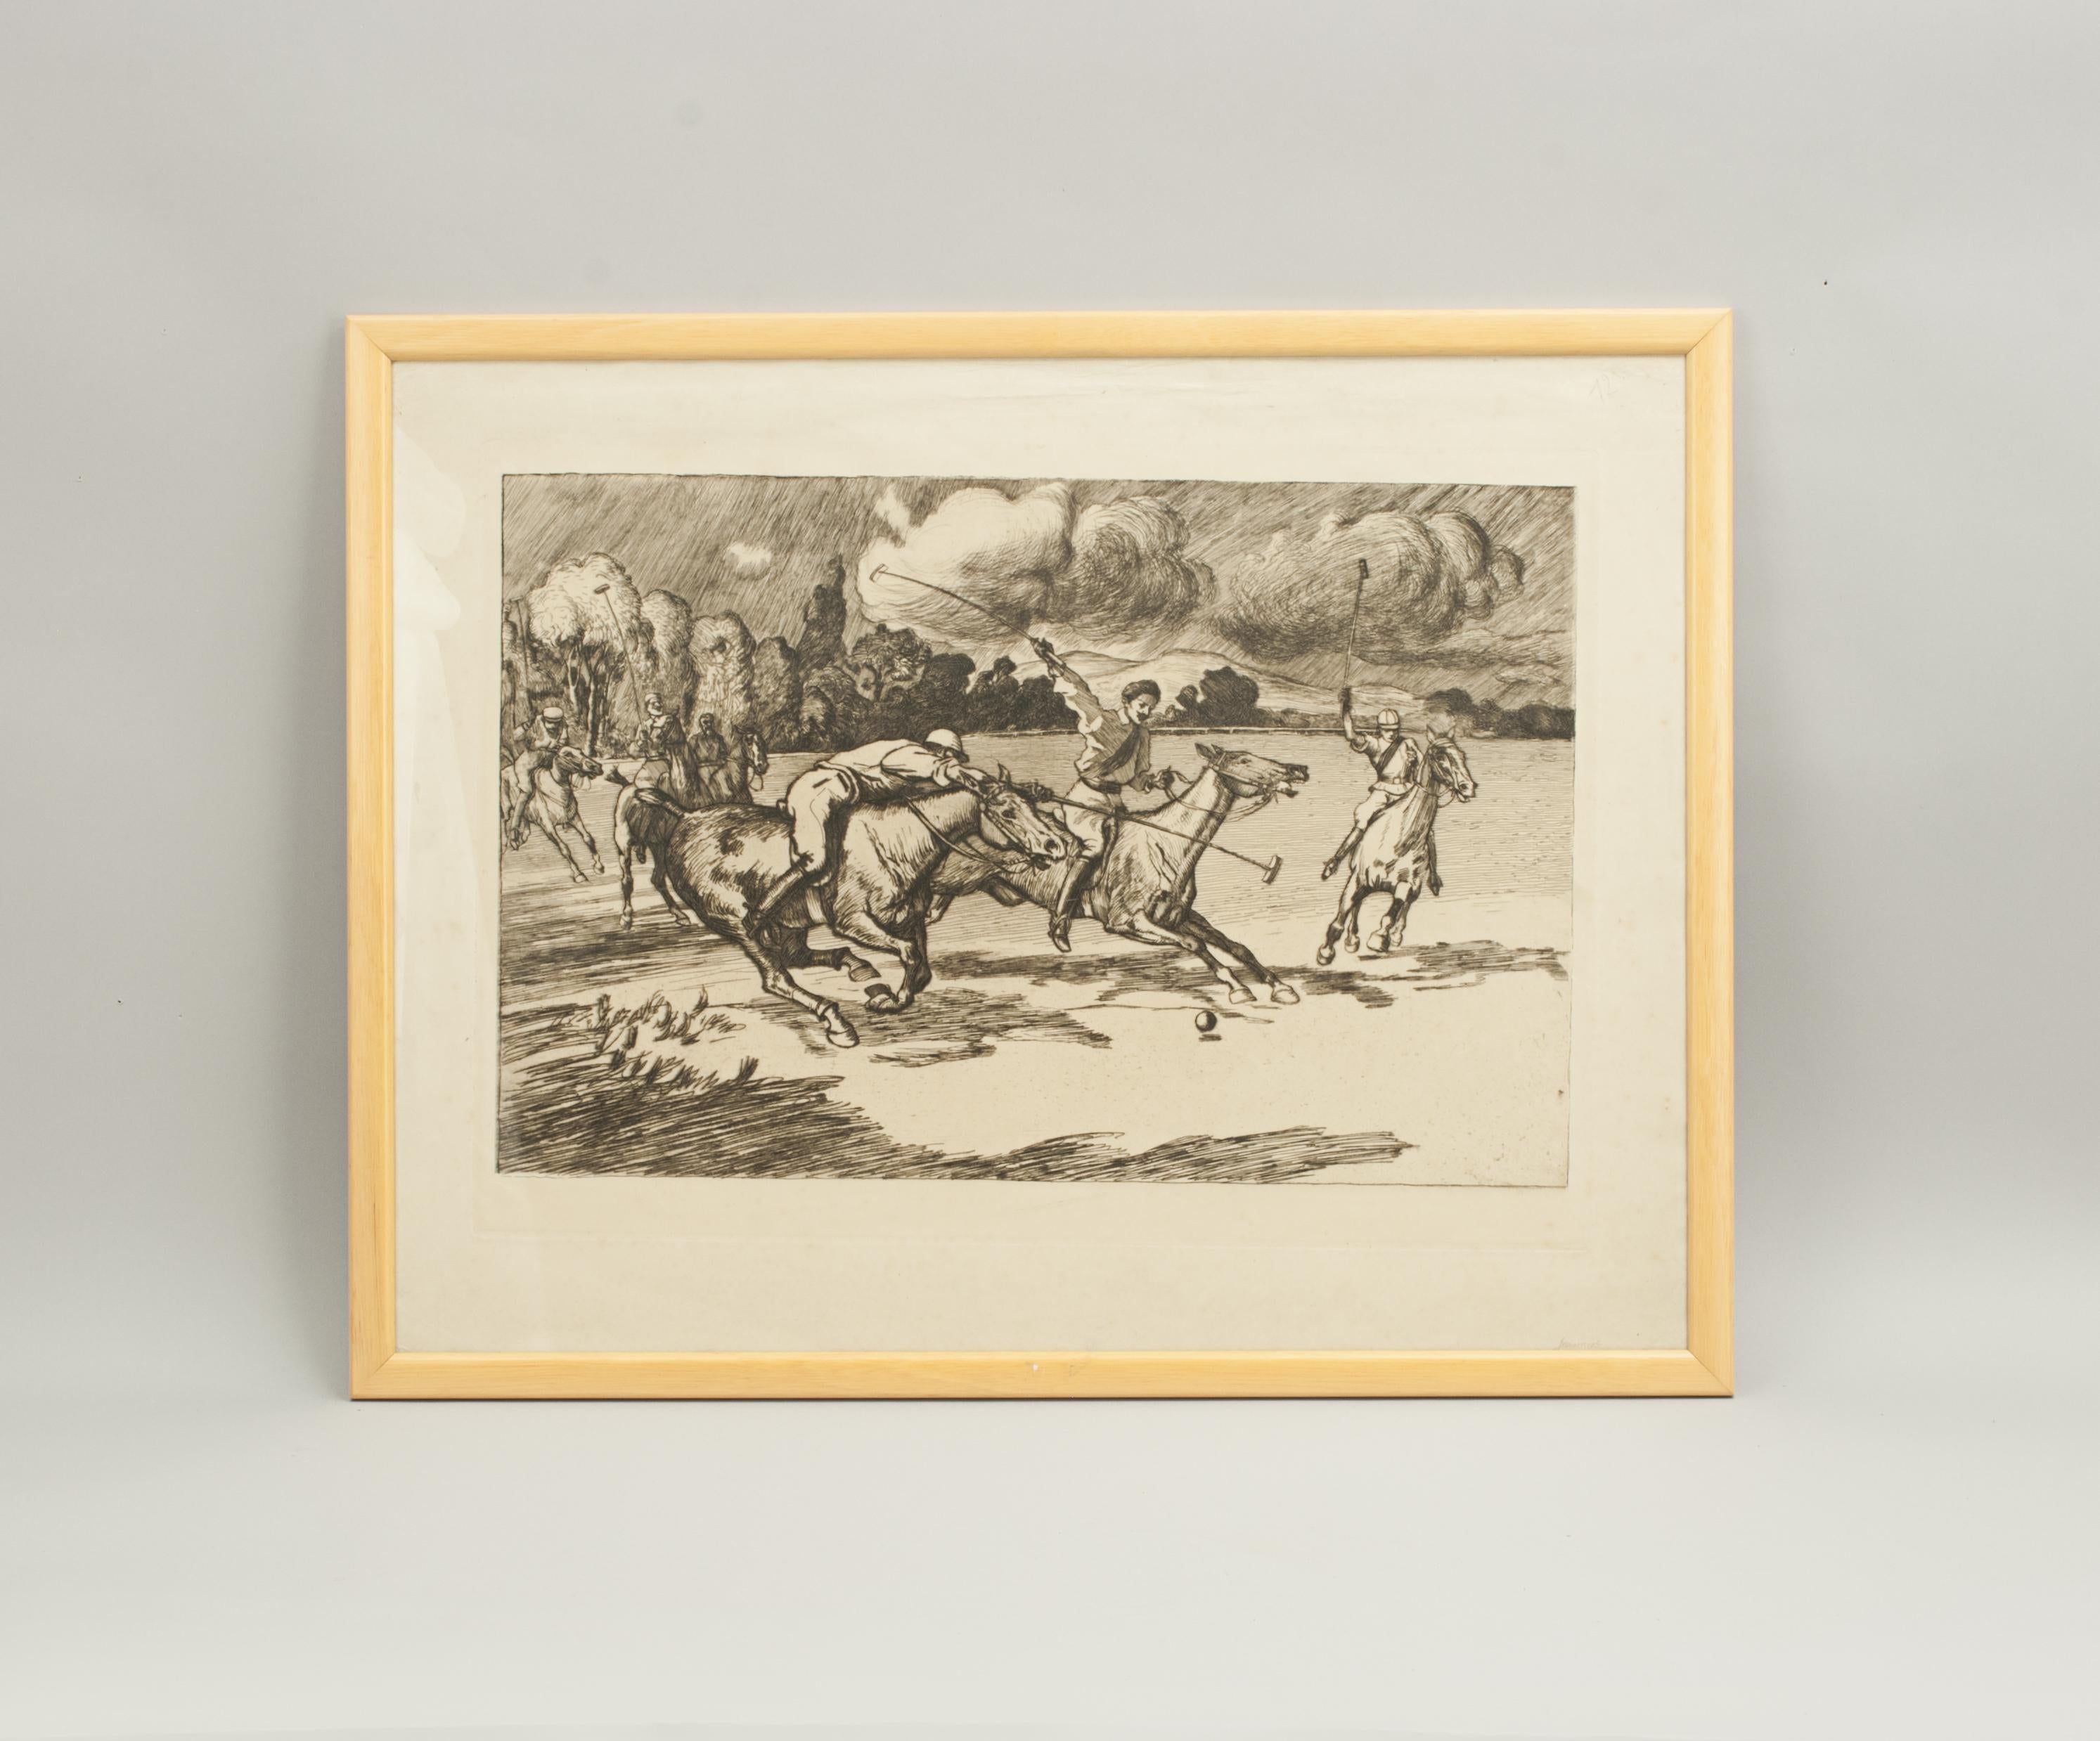 Polo picture, Drypoint Etching by Pierre-Georges Jeaniott.
A rare Polo match etching by the artist by Pierre-Georges Jeaniott (French, 1848-1934). The drama of the match has been well captured and the etching is signed in pencil (bottom right hand